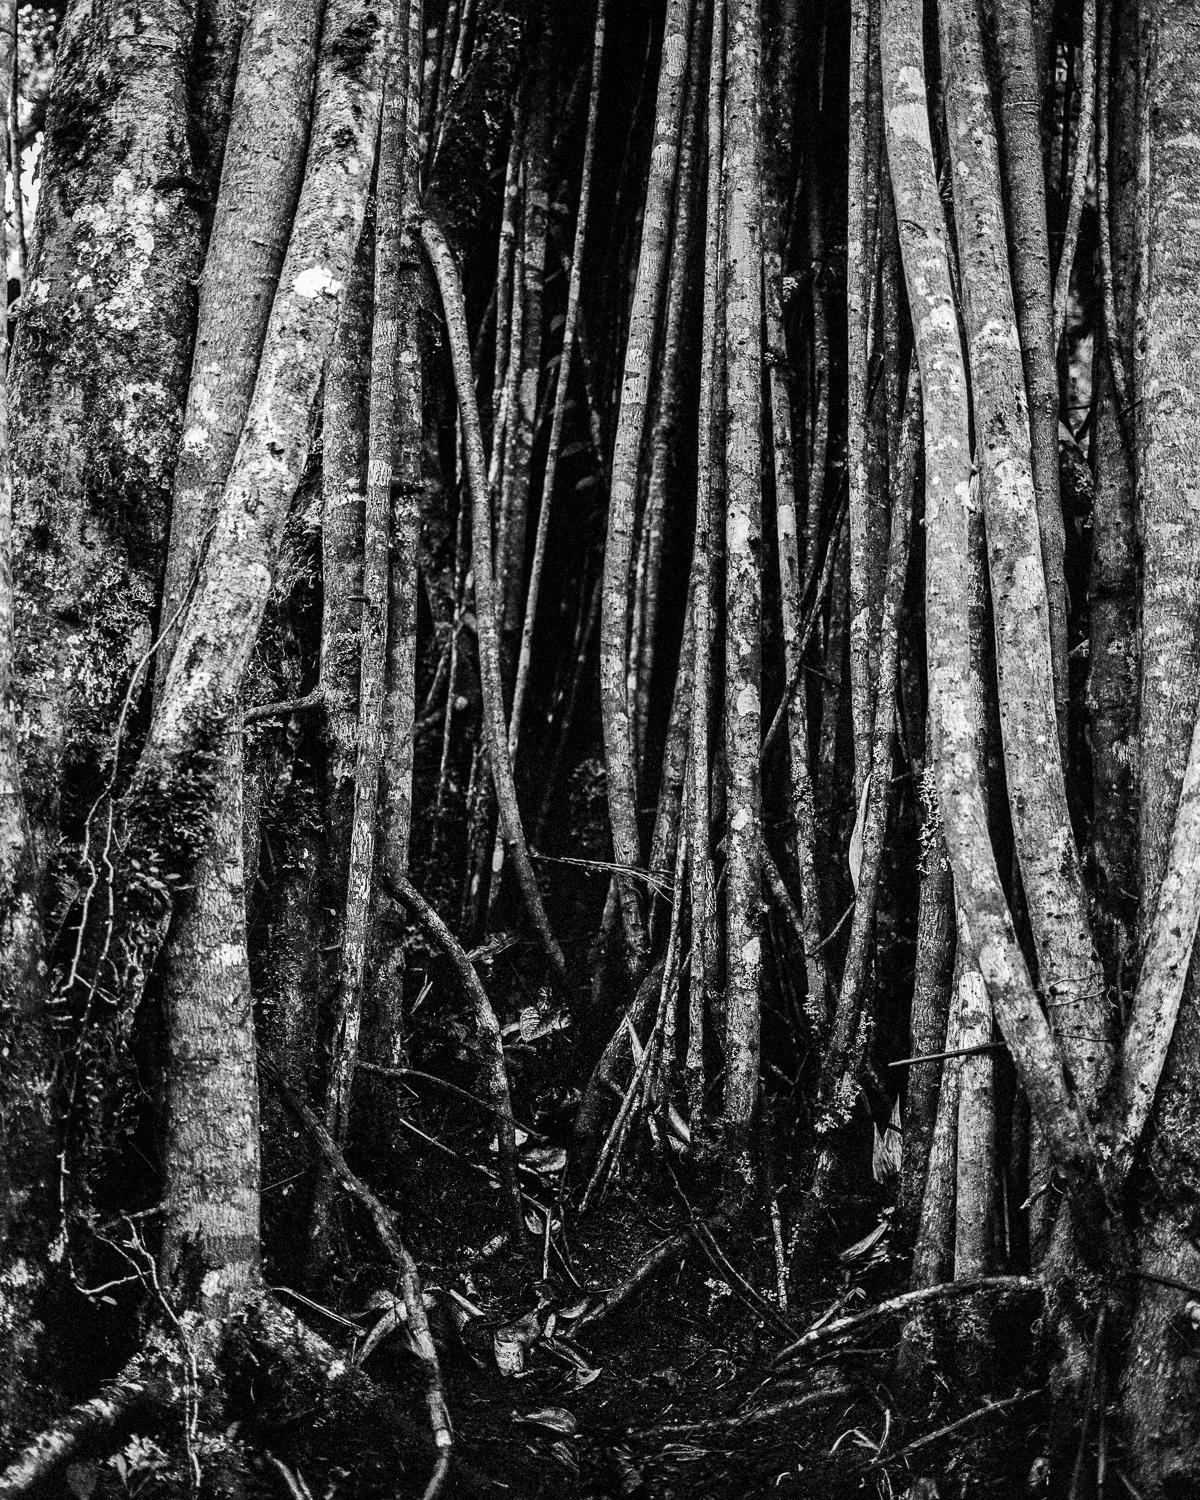 Miguel Winograd  Black and White Photograph - Raíces Selva Oscura, Pigment Prints